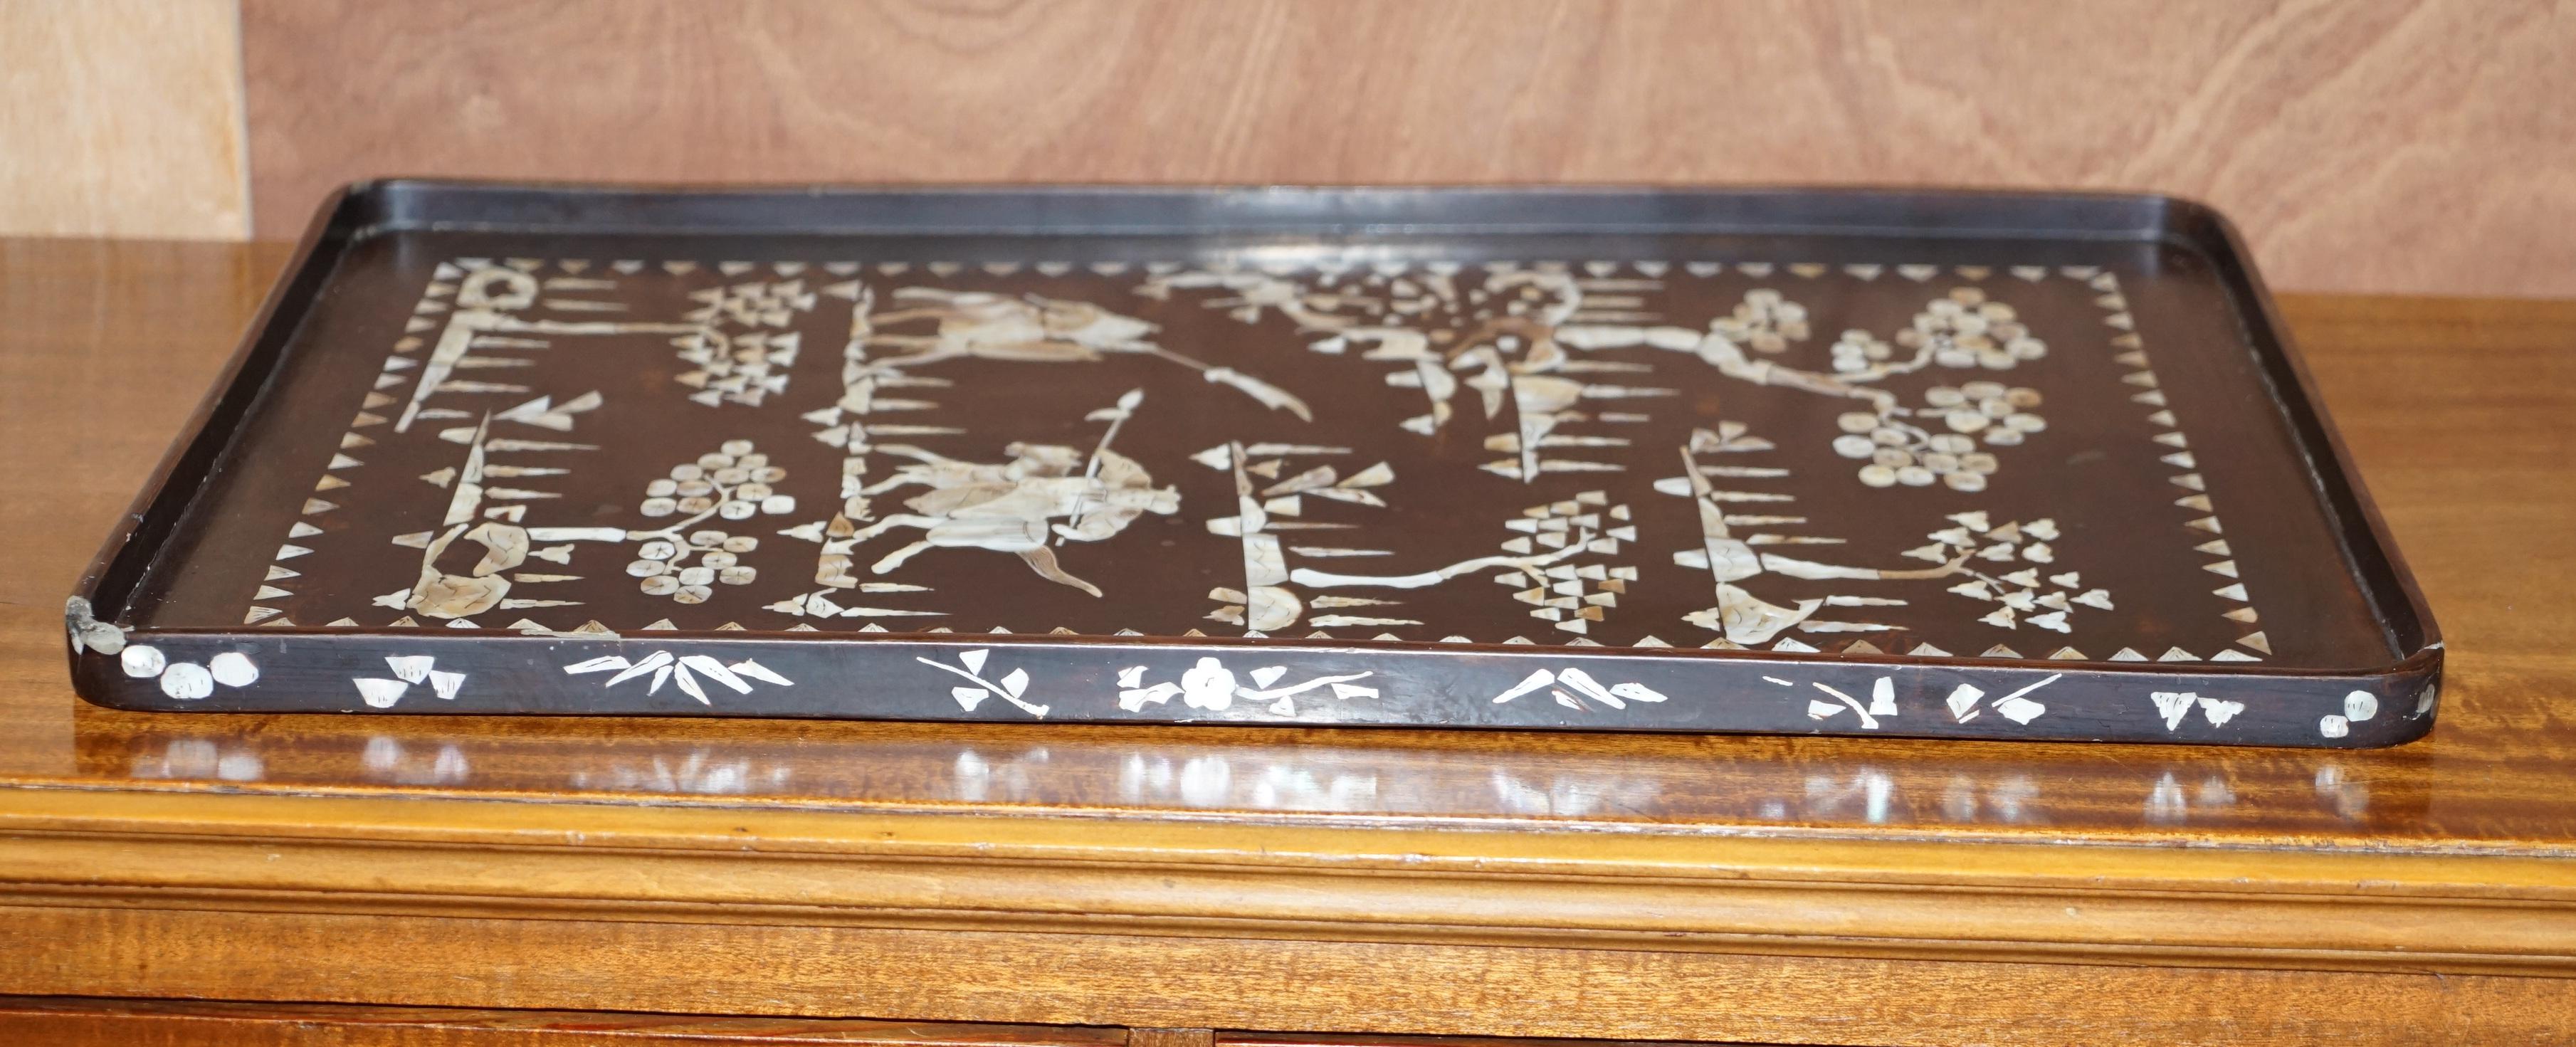 Stunning Antique Chinese Warrior Mother of Pearl Inliad Paper Mache Dinner Tray For Sale 5